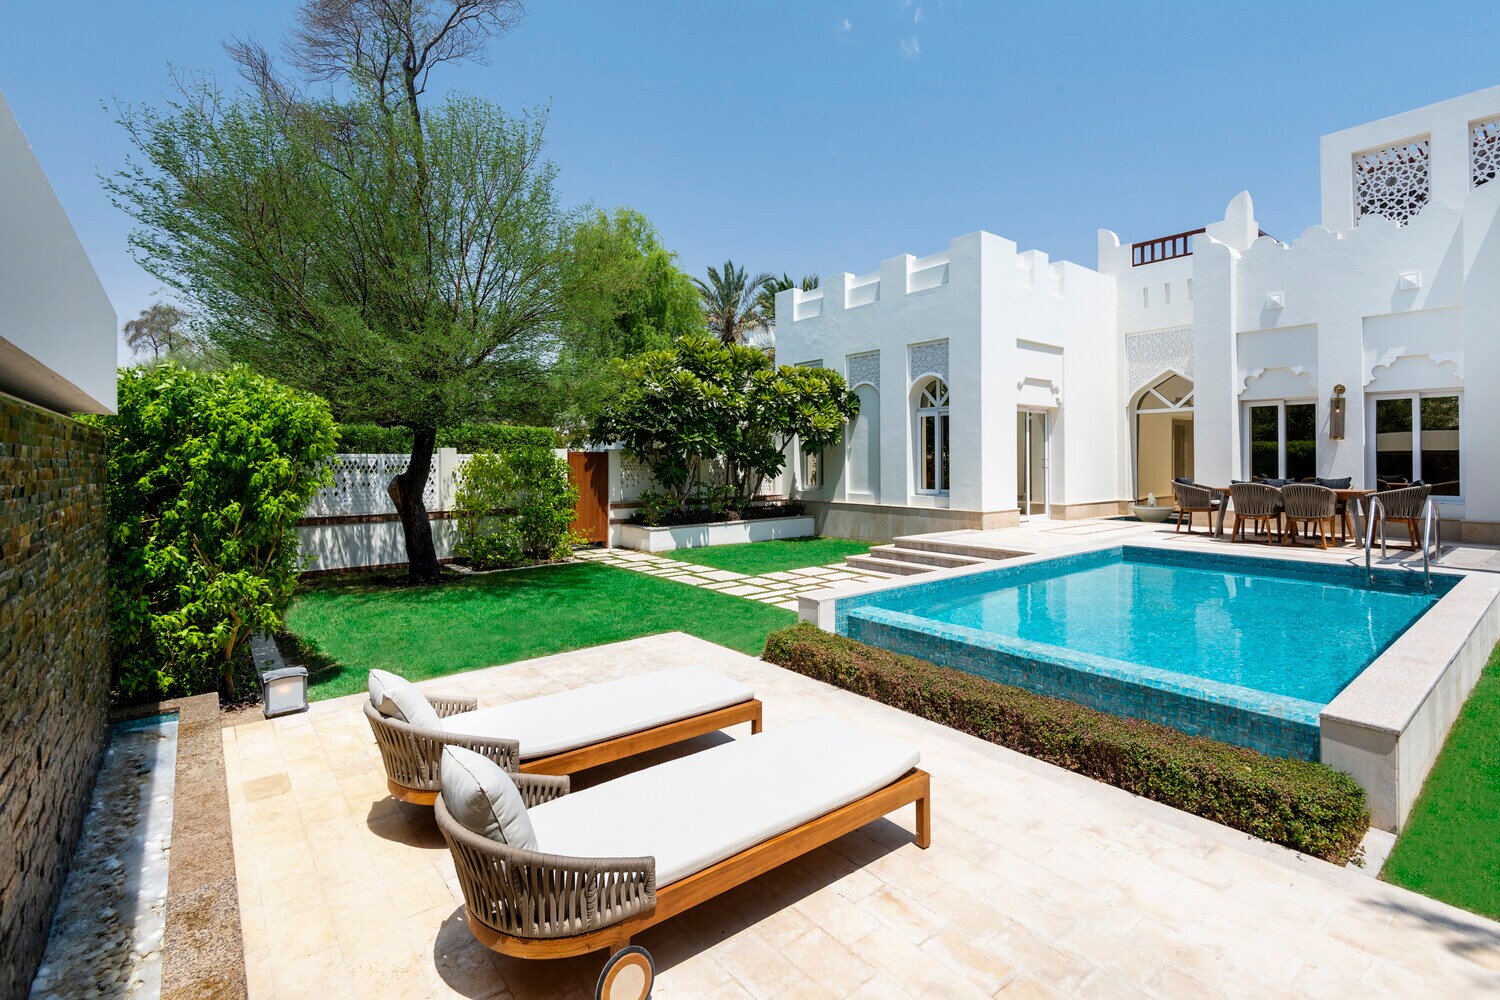 Enthralling two bedroom villa with arabesque design, plunge pool and lush garden